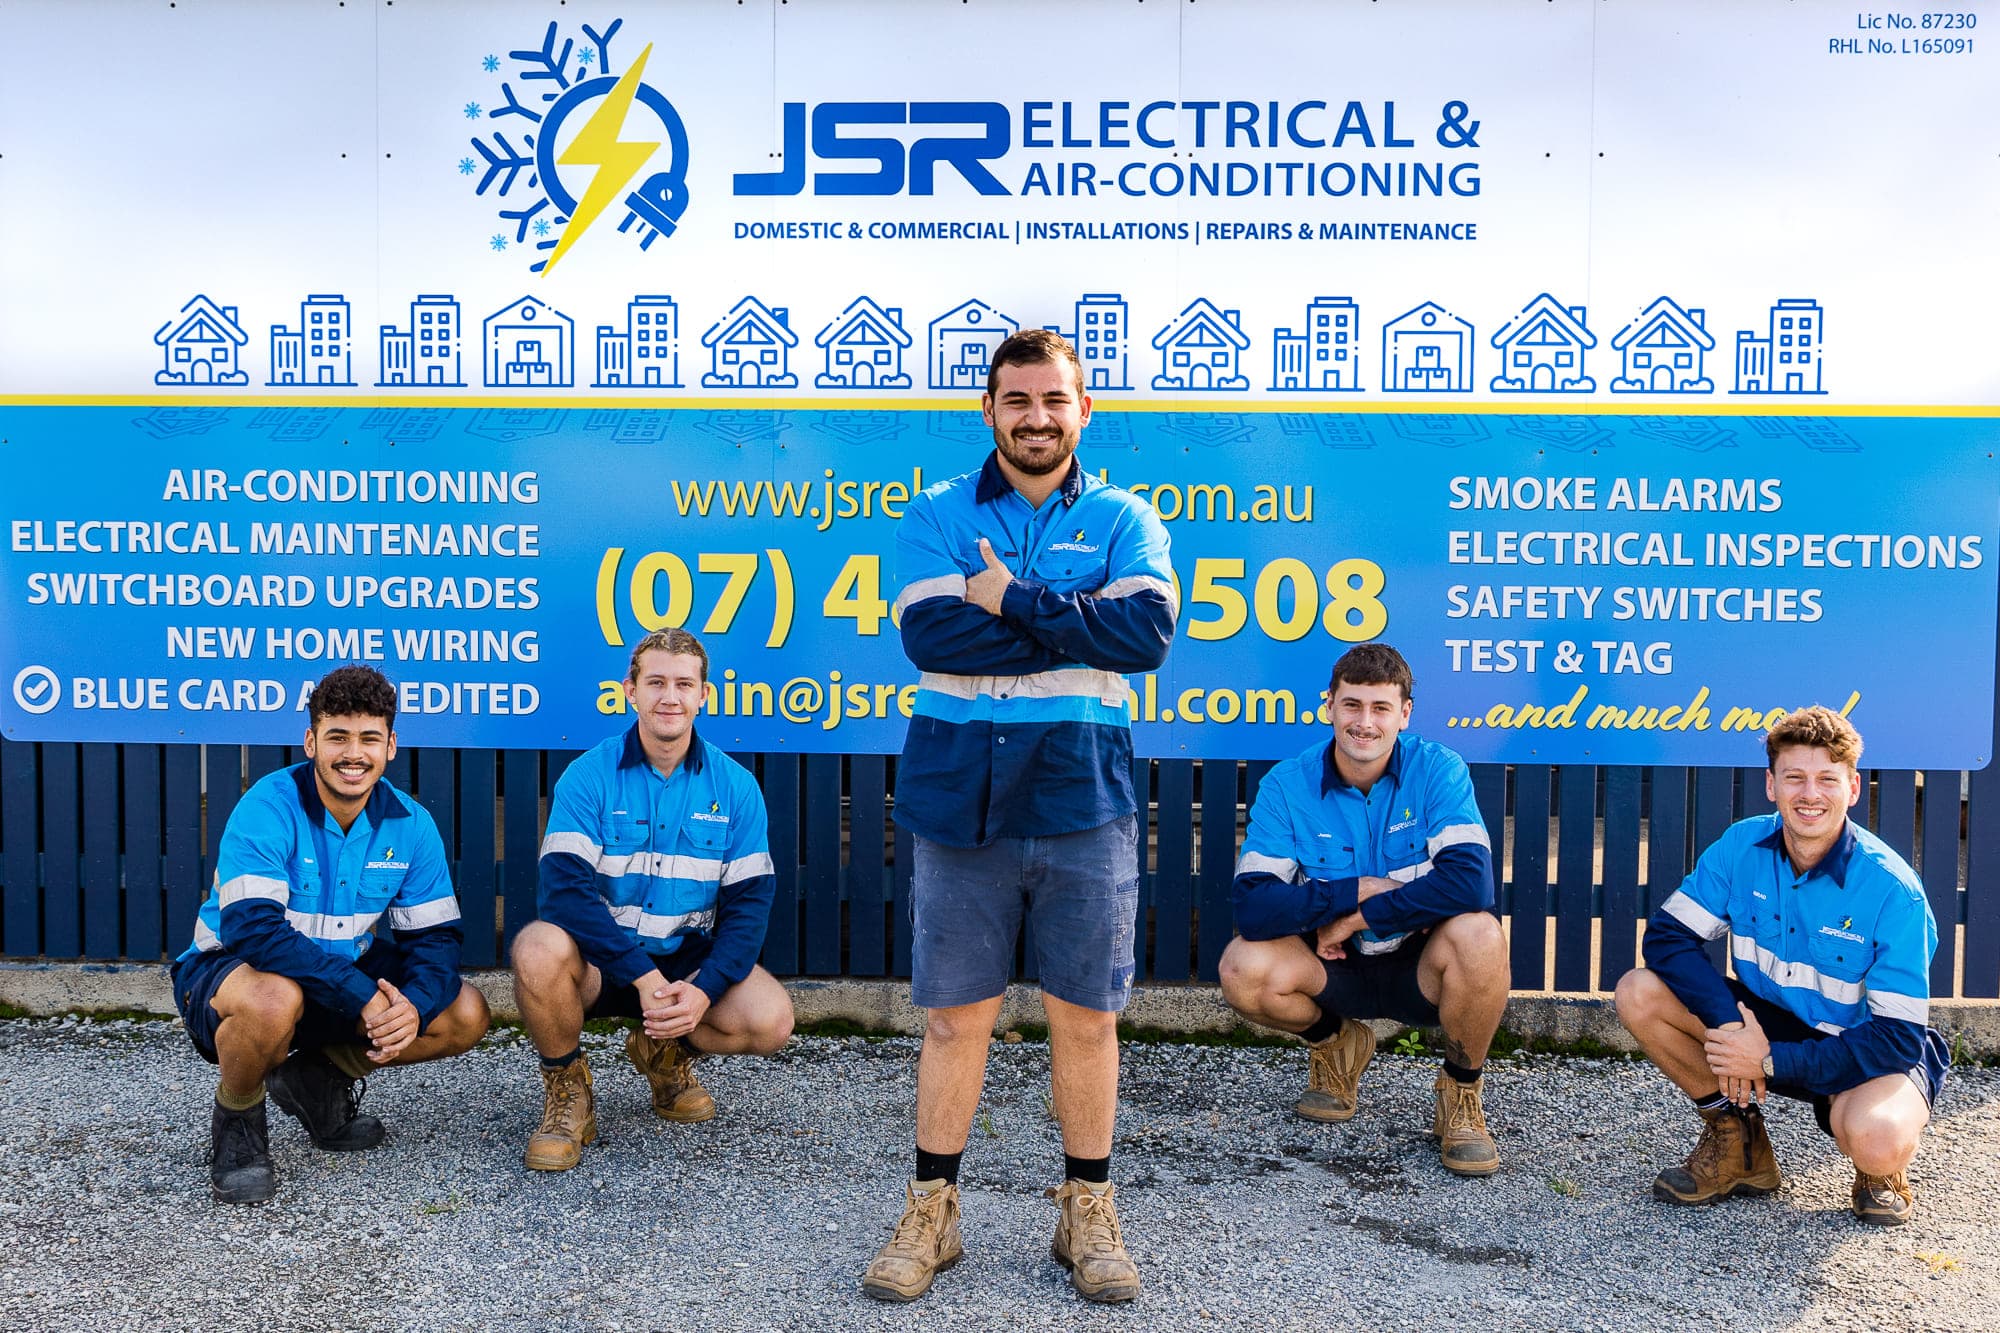 Staff members in Mackay posing and smiling in front of a sign advertising electrical services.